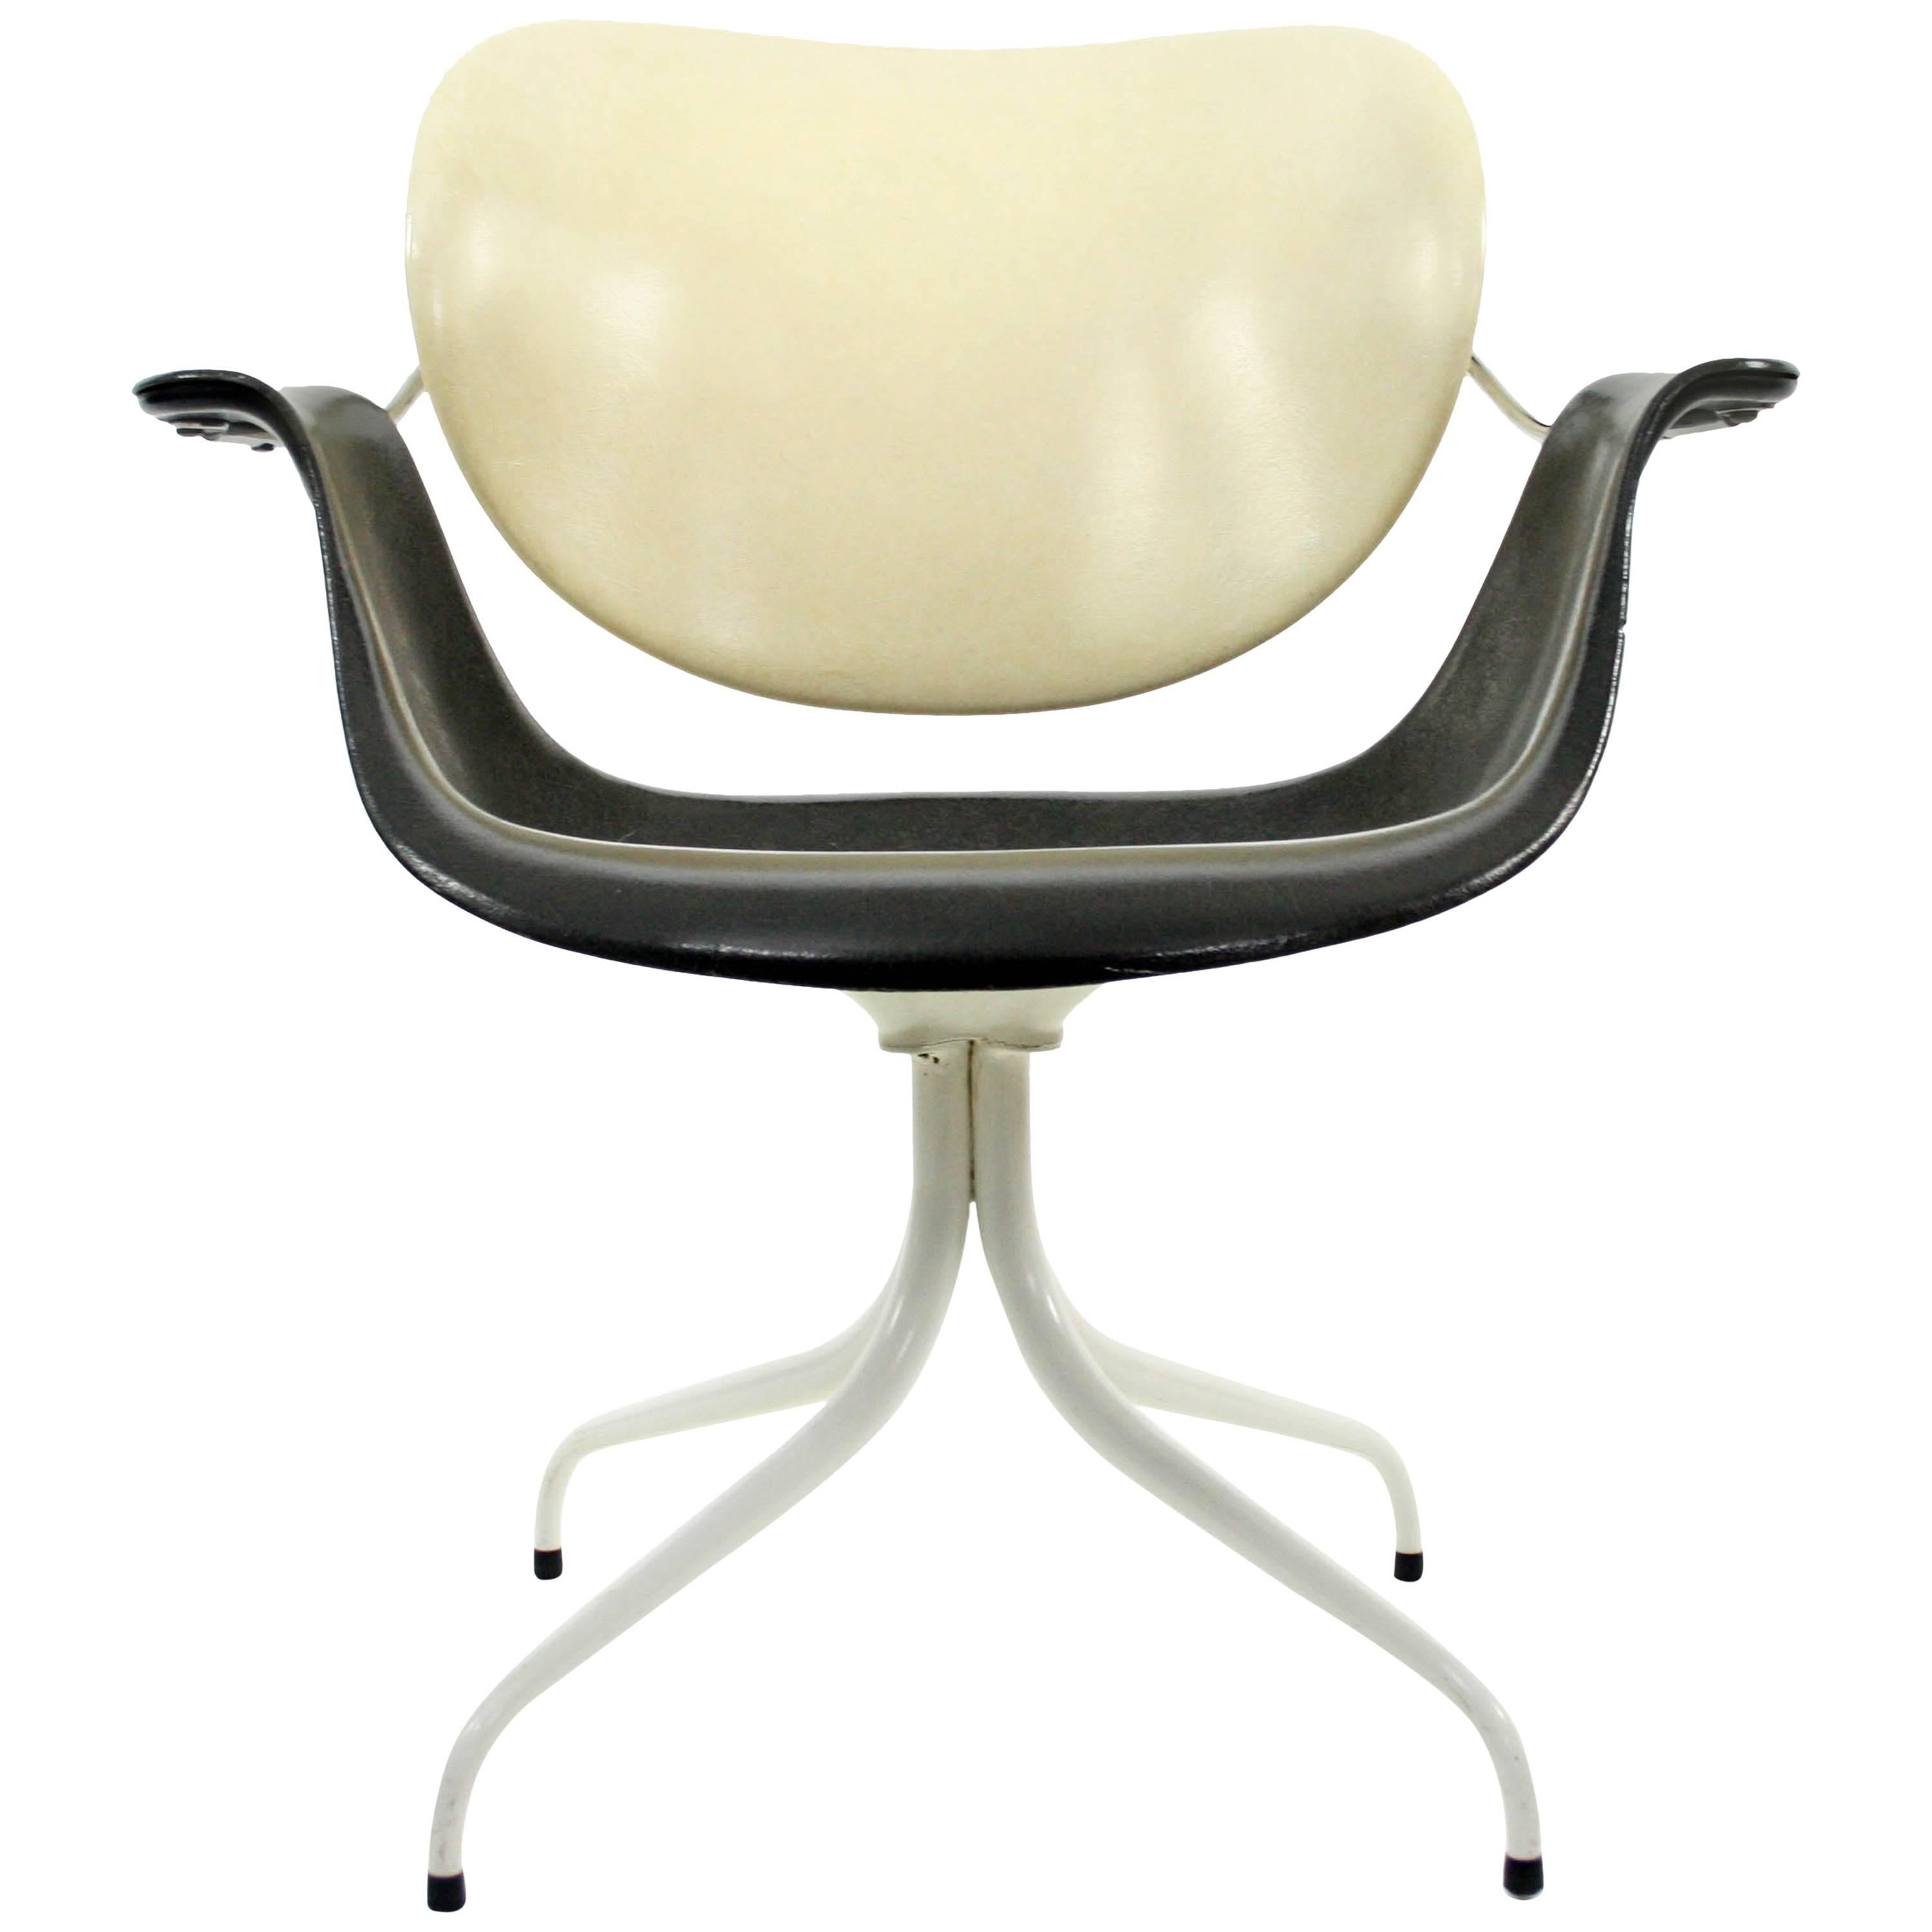 Maa Chair by George Nelson & Associates for Herman Miller, 1954